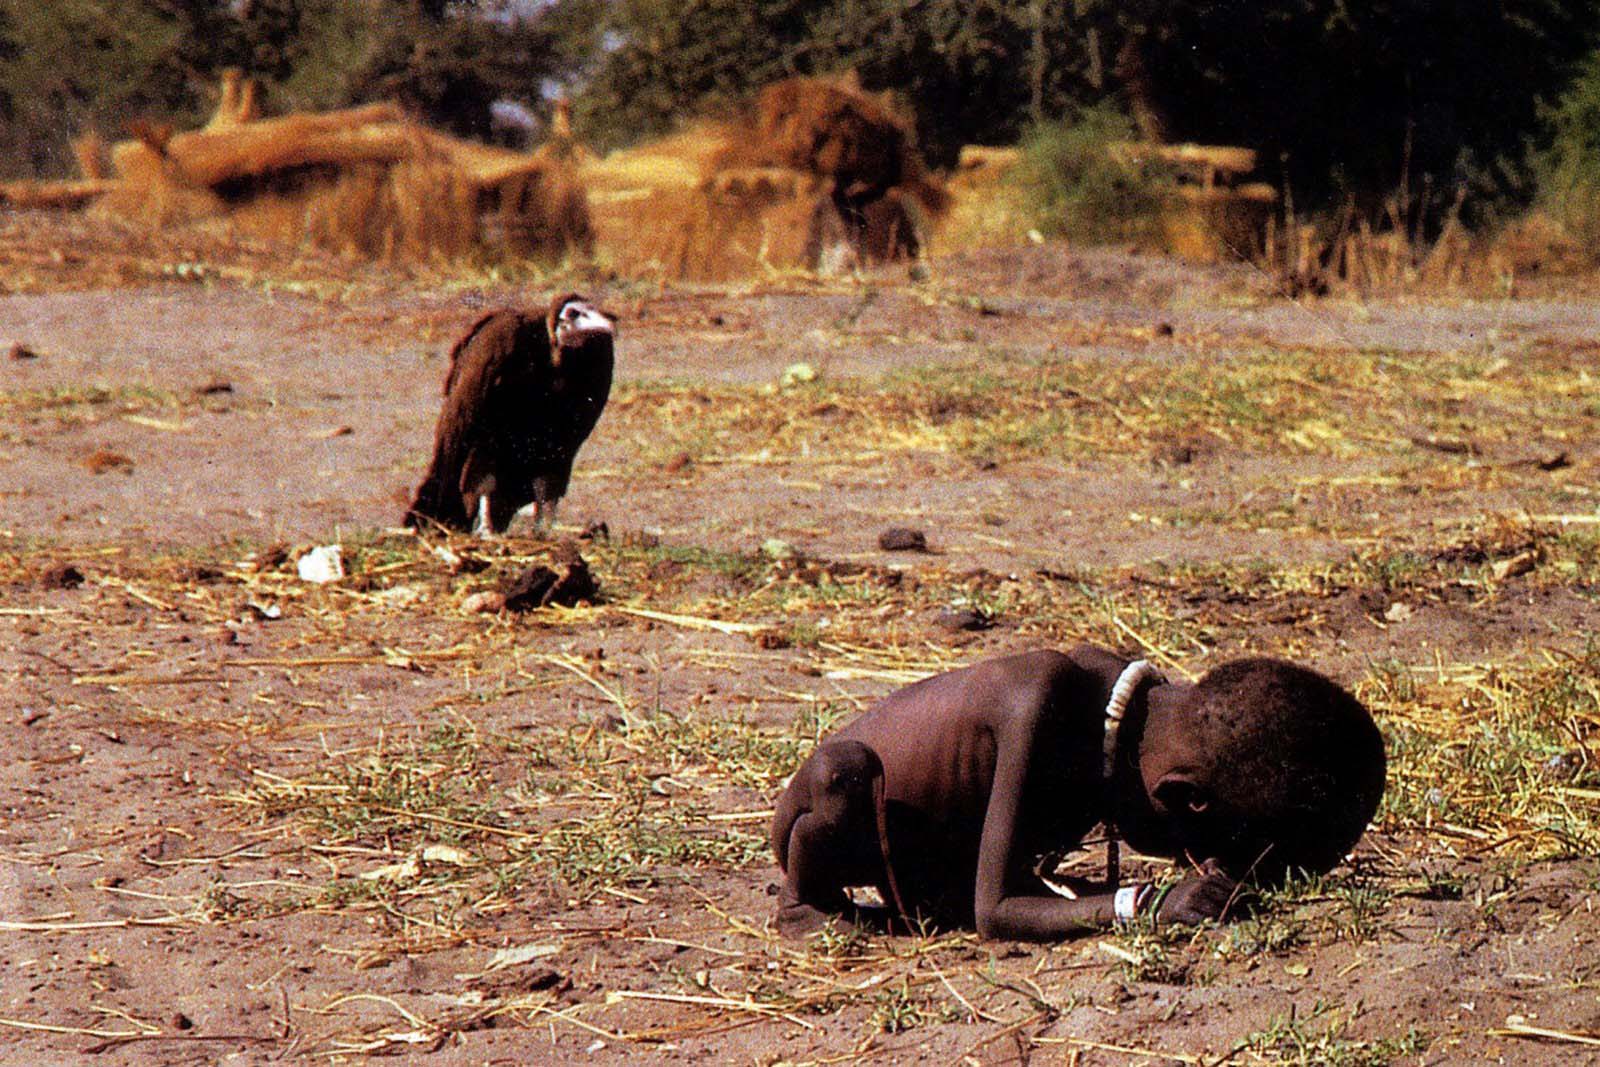 1994 Pulitzer prize winner Kevin Carter – “Vulture and Child." - A child who is too weak to make it to a feeding station has a vulture land nearby waiting for her to die.